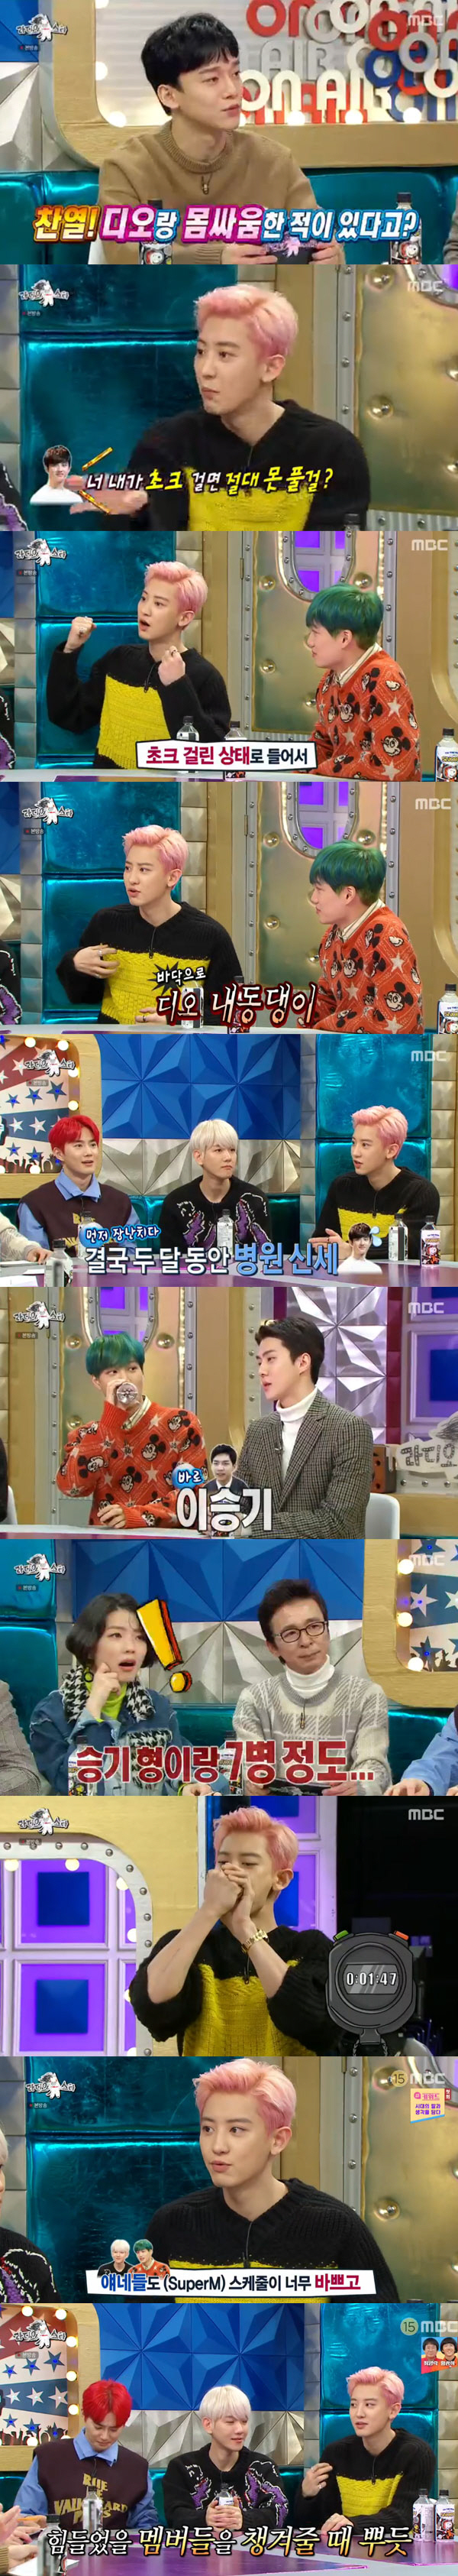 Radio Star was also EXO. The full gesture made the room full of laughter.On MBC Radio Star broadcasted on the 4th, Suho, Chanyeol, Baekhyun, Kai, and Sehun appeared as guests while group EXO Chen appeared as special guests.On this day, Suho showed a radio star that released abs at the same time as the recording began.Chanyeol laughed when he said in a preliminary interview that he was not expecting anything from Chens performance; Chanyeol said: Chen is nice and serious.Rather, I think I will be attacked by the members. When Chen said he was playing a special MC, Suho came to mind, Sehun said. Suho is motivated and passionate.I think there was no jealousy, he said.EXO is a group that has written history of exceeding one million full-length albums in 12 years, and appears in textbooks. Baekhyun has achieved a long dream while doing EXO.When I interviewed him in the past, he said, I want to be a group in textbooks. He said, We are now out.Leader Suho also expressed his sadness at his agency SM. Suho said, When I was growling before, I also took music EXO D.O. overseas, but nowadays it has been reduced.Were called minimalism. I went to a concert abroad a while ago, and I gave him a suite if I was a leader.Chanyeol said, When I go to a hotel, I rent a floor for the safety of the members. Suho type used it as a room for gathering suites, but nowadays I was in a narrow room.The youngest Sehun feels aging these days, Sehun said: I talk about hangovers. When I relieve stress, I feel better and I find them.In the old days, kites were possible, but the fortress should be abandoned the next day if Haru was drunk. At this time, Chanyeol said, EXO D.O. took a vacation a while ago.I didnt plan to meet him, but Sehun called the Pressurized water reactor and said, Brother, Im out. Youre going to go, right?I went, he said. Suddenly, Sehun came to me as if I would join him late. He said, I did not hear from him.I was ready to run the fourth time as it felt, he said. It was about 10 oclock, so it was discharged. Chanyeol had a vocal cord surgery in June this year and performed a silent performance; he said, I had a vocal cord surgery on June 15; I first had a problem with the problem, but I did not improve.I was unable to speak for a month after surgery because a cyst was found in a close examination. I have lived a lot of Haru Haru, and I have a lot of bad ideas when I think, Why did you overwork me? So I avoided the depression.From then on, I started reading books with an open mind. EXO members have also been honest about their income. Suho said, We talk about each other earning a lot. People who earn a lot live.I have sold more than 500,000 solo albums. I live hard in musicals, movies, etc. Chanyeol was a financial king. I have a pension, a subscription, Chanyeol said. I became a landlord two months ago.Sehun said he would send coffee tea to the drama set, said the youngest Sehun, a righteous man. Five coffee teas came, I was impressed and took a video.Chanyeol also recently revealed the story that was impressed by EXO D.O.Chanyeol said, When I was performing silent for a month, I had a lot of Pressurized water reactors.I can not even say it, but I came to my cell phone and did it. Chanyeol also confessed that he had a physical fight with EXO D.O.; he said, Pressurized water reactors do a good job of toxic jujitsu.Pressurized water reactor says, I cant untie a choke. So I hung a choke, and I couldnt breathe.I was not able to see the consciousness, but I was stuck because of my pride. For a while, the string of reason was cut off and the superhuman power came out and I was overtaken by the Pressurized water reactor.Then the ankle of the Pressurized water reactor went back: the Pressurized water reactor failed to walk for two months, he said.Sehun became a close friend of Lee Seung Gi through Netflix The Beginner is You 2.Sehun said, I was surprised to hear that the next day after the recording, I had seven bottles of alcohol.Leader Suho also takes a lot of mental health from the members. Suho said, Baekhyun was having a hard time flying when he was performing overseas concerts as a super M.It was called, he said, and he laughed.Kai cited himself as a bad member of Mental, who said: Self is affected by evil, Mental is bad, so I try to avoid and not see evil in the first place.I have a lot of rebooks and regrets, he said. I try to fix a lot in that part. Sehun expressed his affection for the members, who said, Thanks to the members, I have overcome the hard times, and I am happy to be with the members.The time weve been together has not been wasted. It has been healed by itself.EXO. Suho, who has been running for the time being, said, Members talk about renewal, he said. We have four years left, including whether we were in SM, making other labels, and military service.Im thinking with some room, he said frankly.